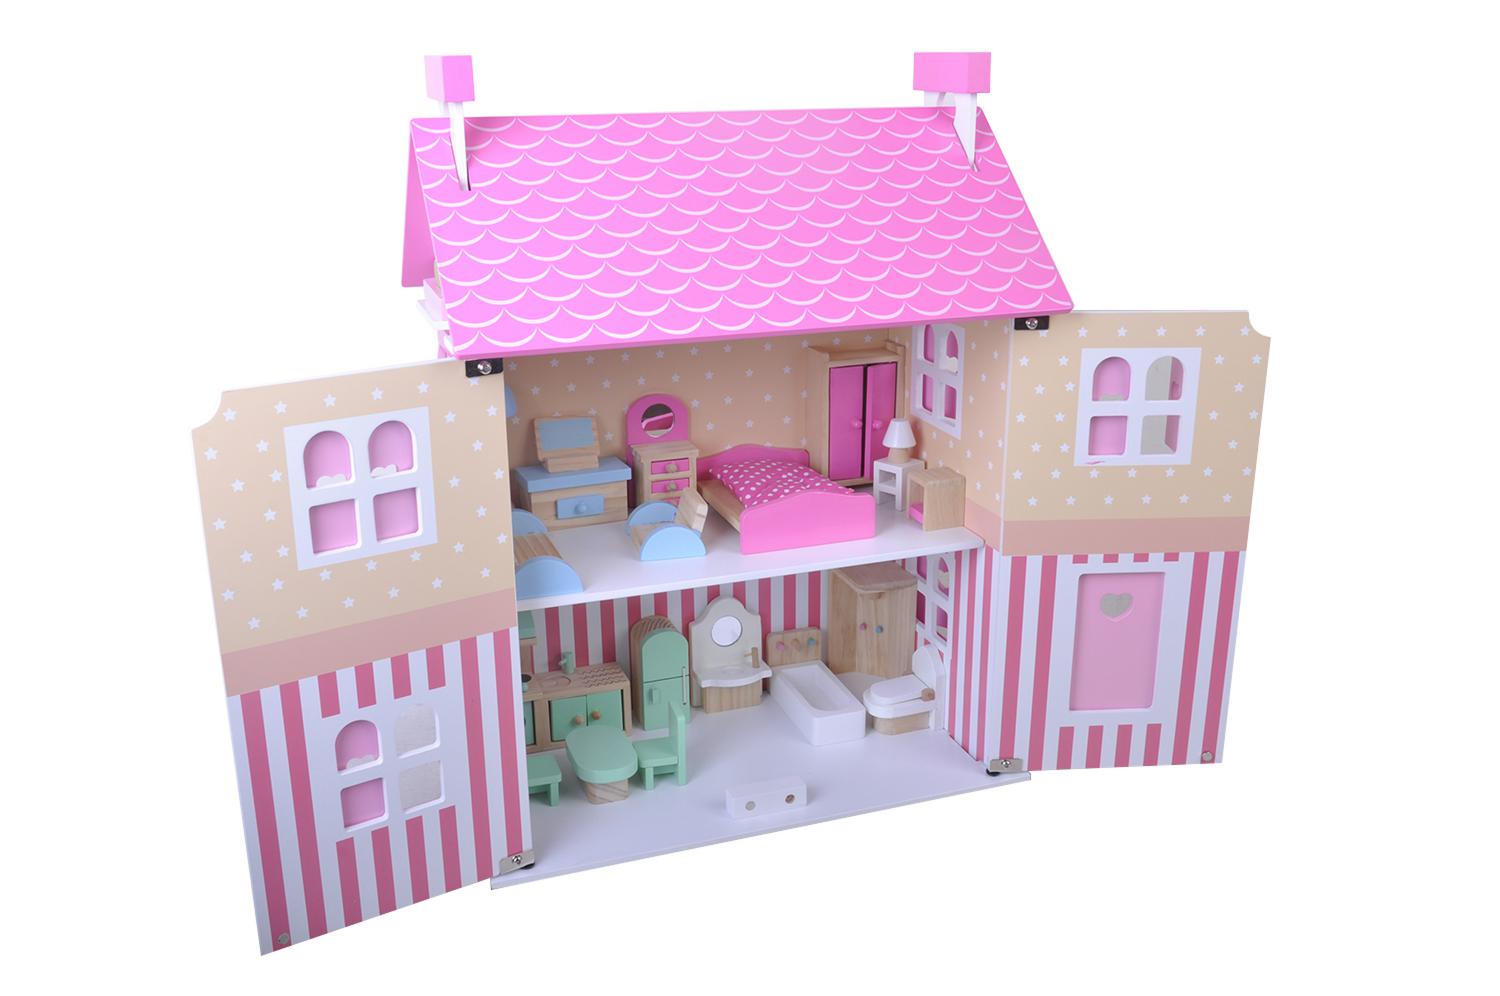 Rose Cottage Wooden Dolls House Cheaper Than Retail Price Buy Clothing Accessories And Lifestyle Products For Women Men